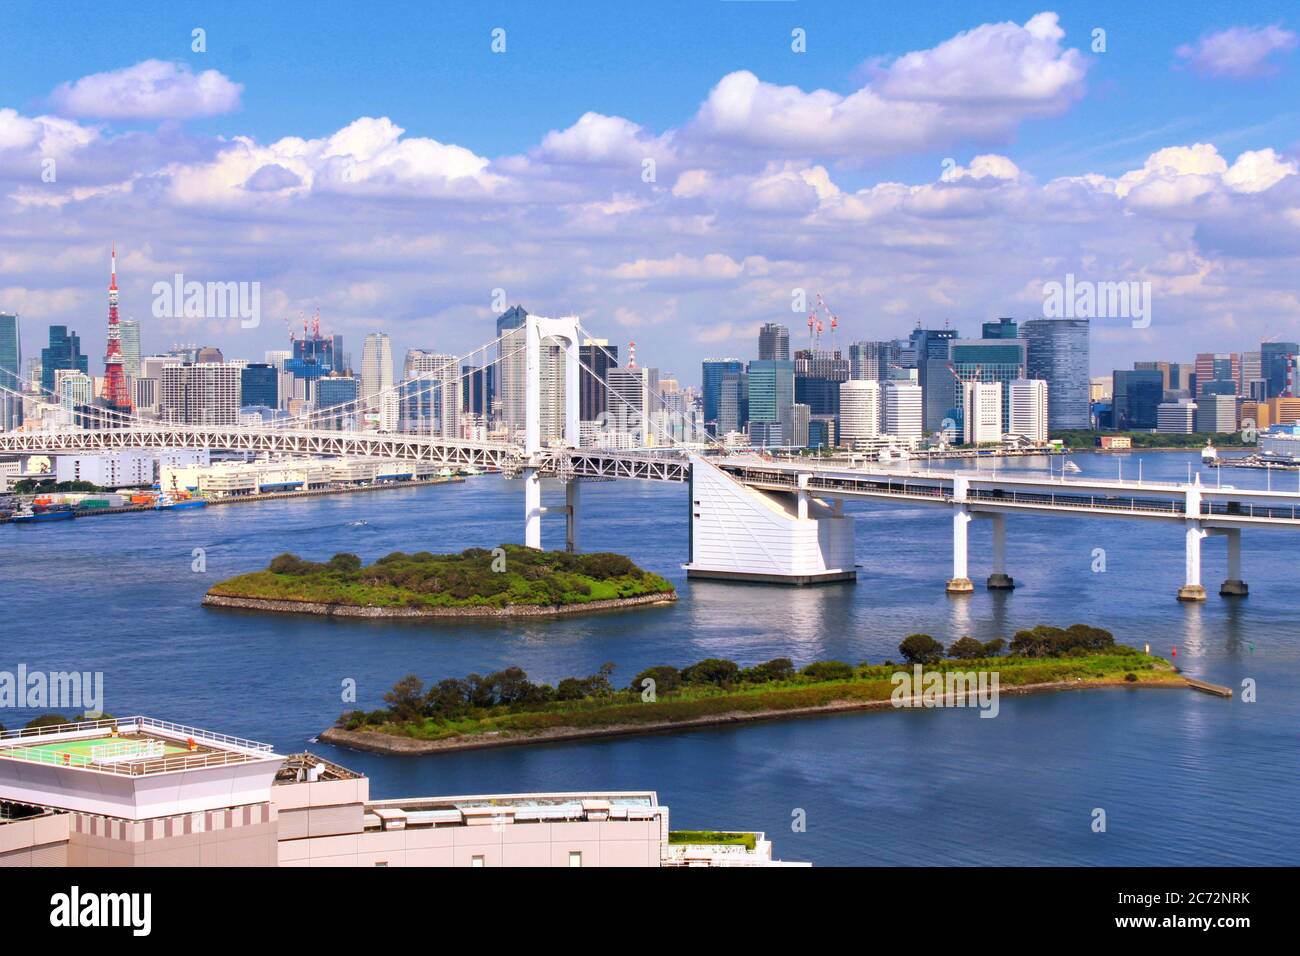 Panoramic view of Odaiba with Rainbow Bridge. Odaiba is a man-made island in Tokyo Bay and a popular entertainment and shopping district. Stock Photo